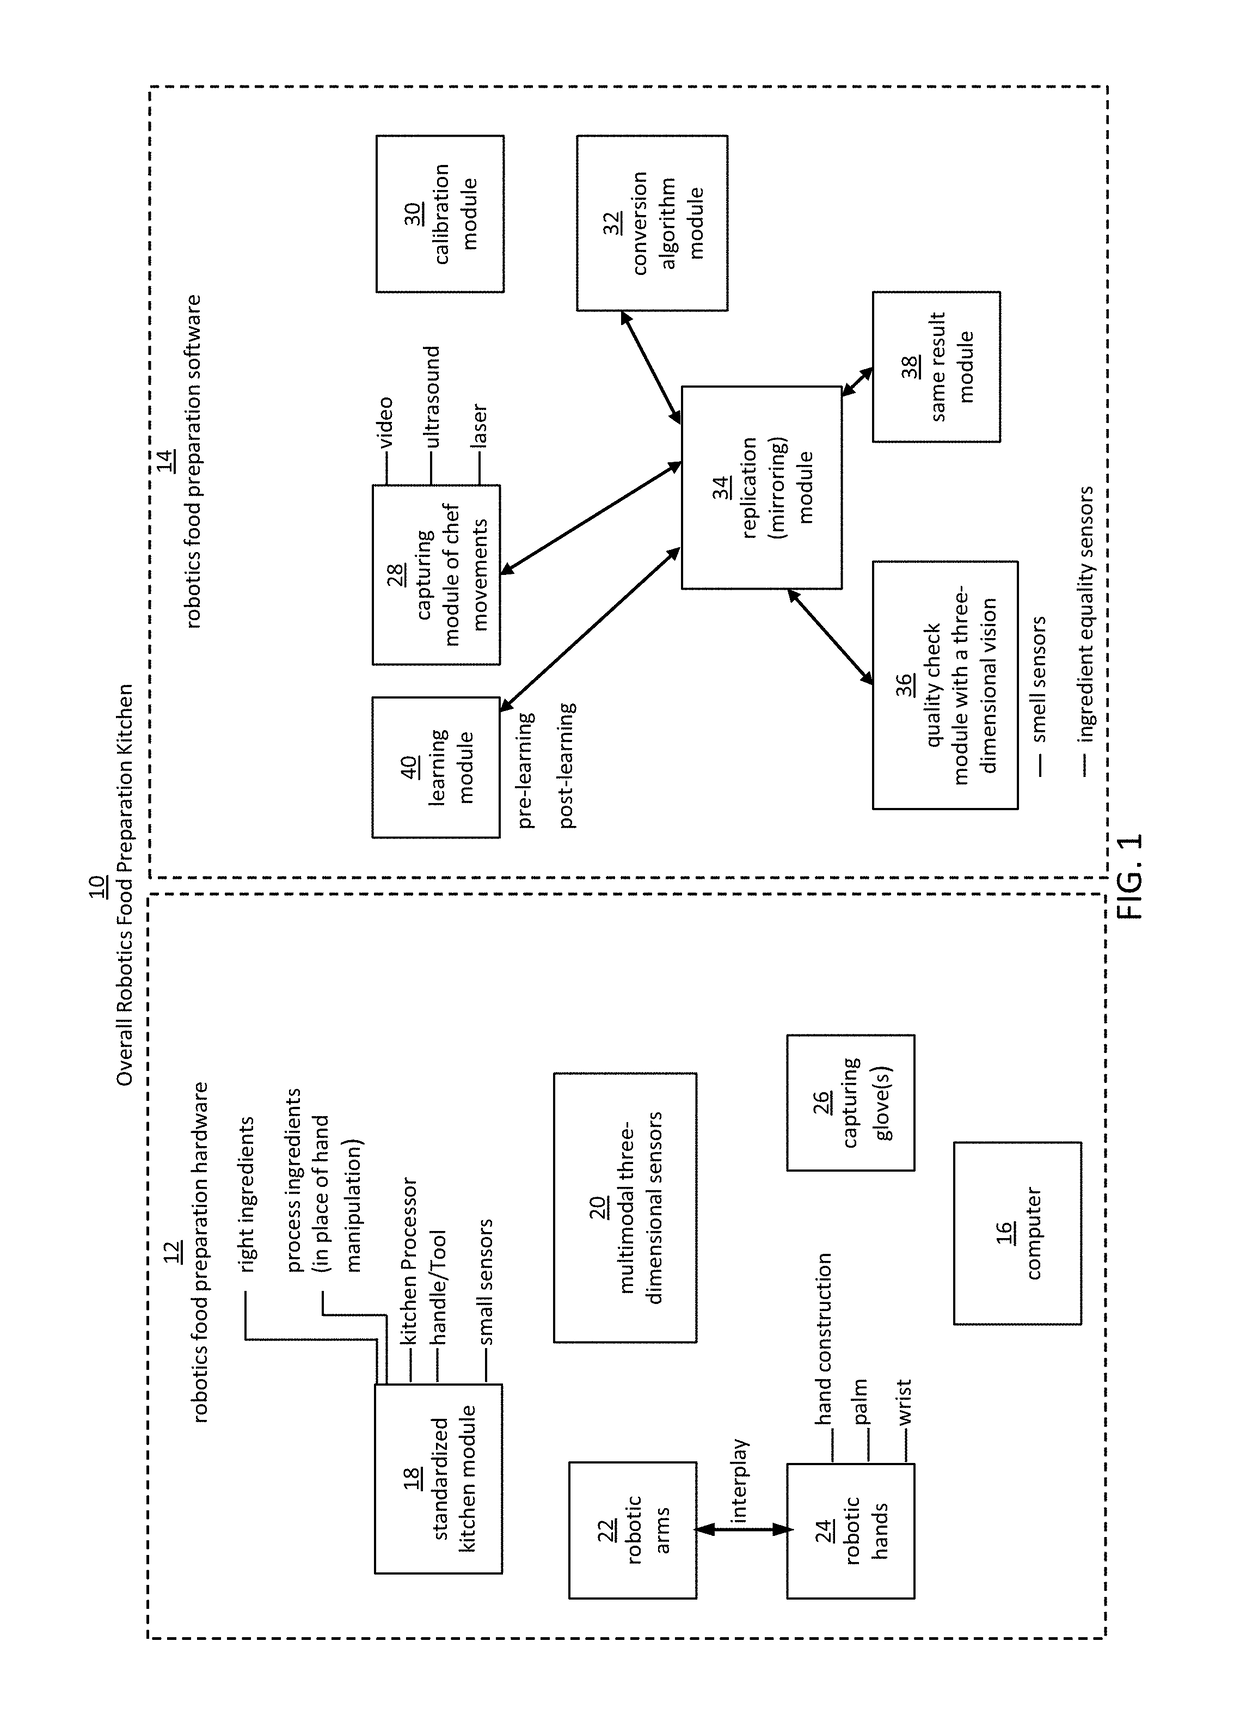 Robotic manipulation methods and systems for executing a domain-specific application in an instrumented environment with containers and electronic minimanipulation libraries